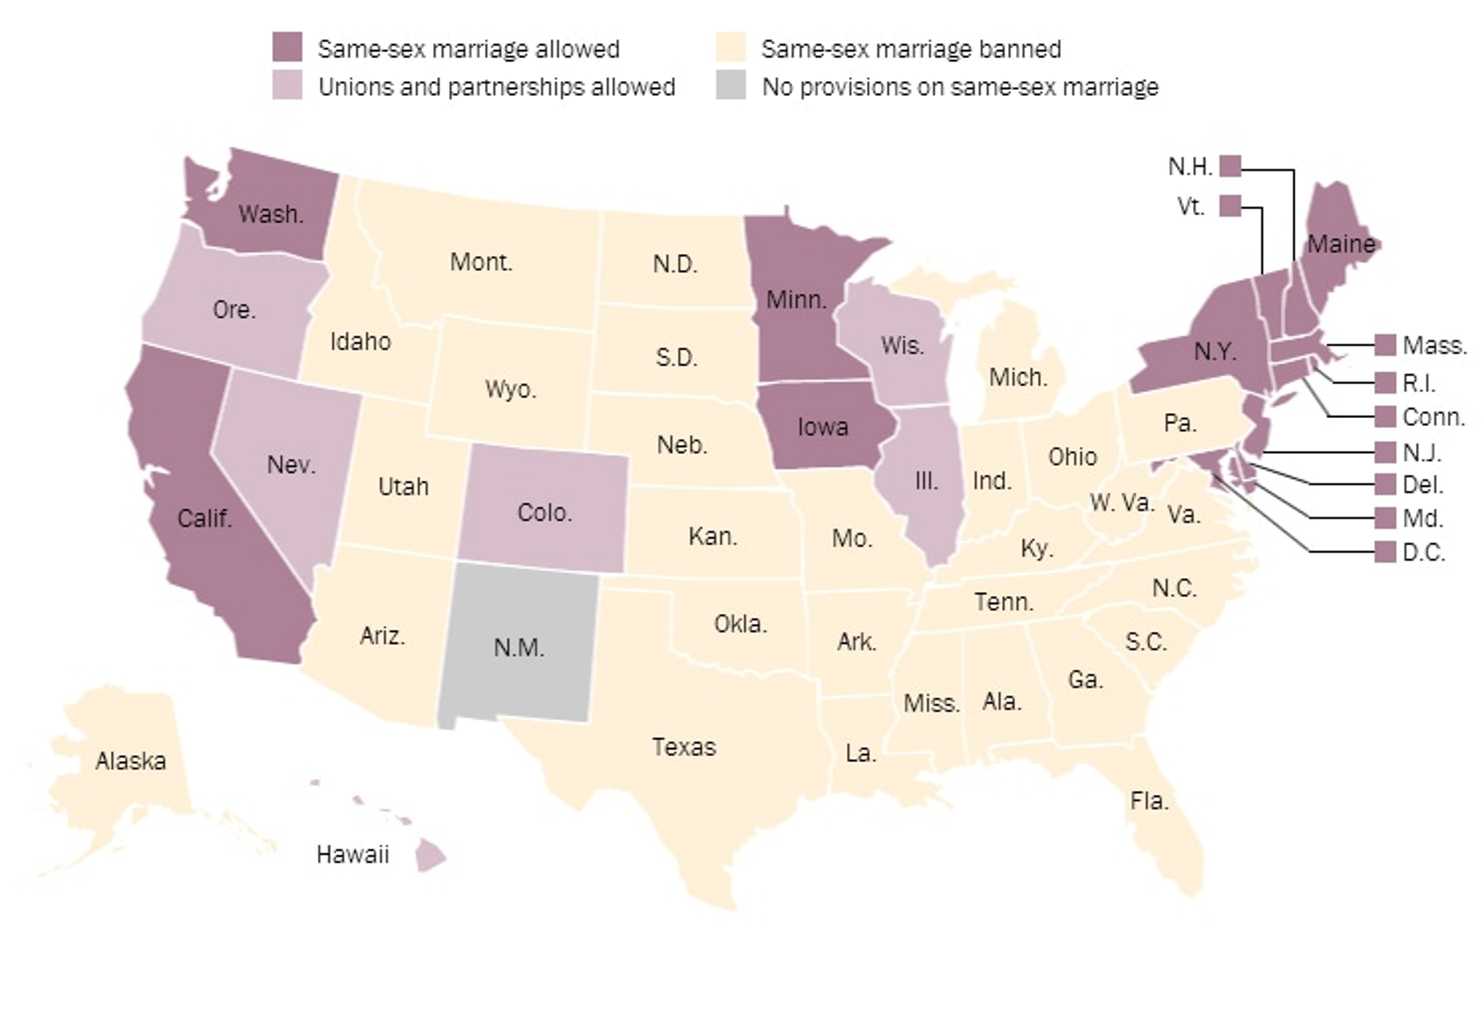 Same Sex Marriage Map &w=1484&op=resize&opt=1&filter=antialias